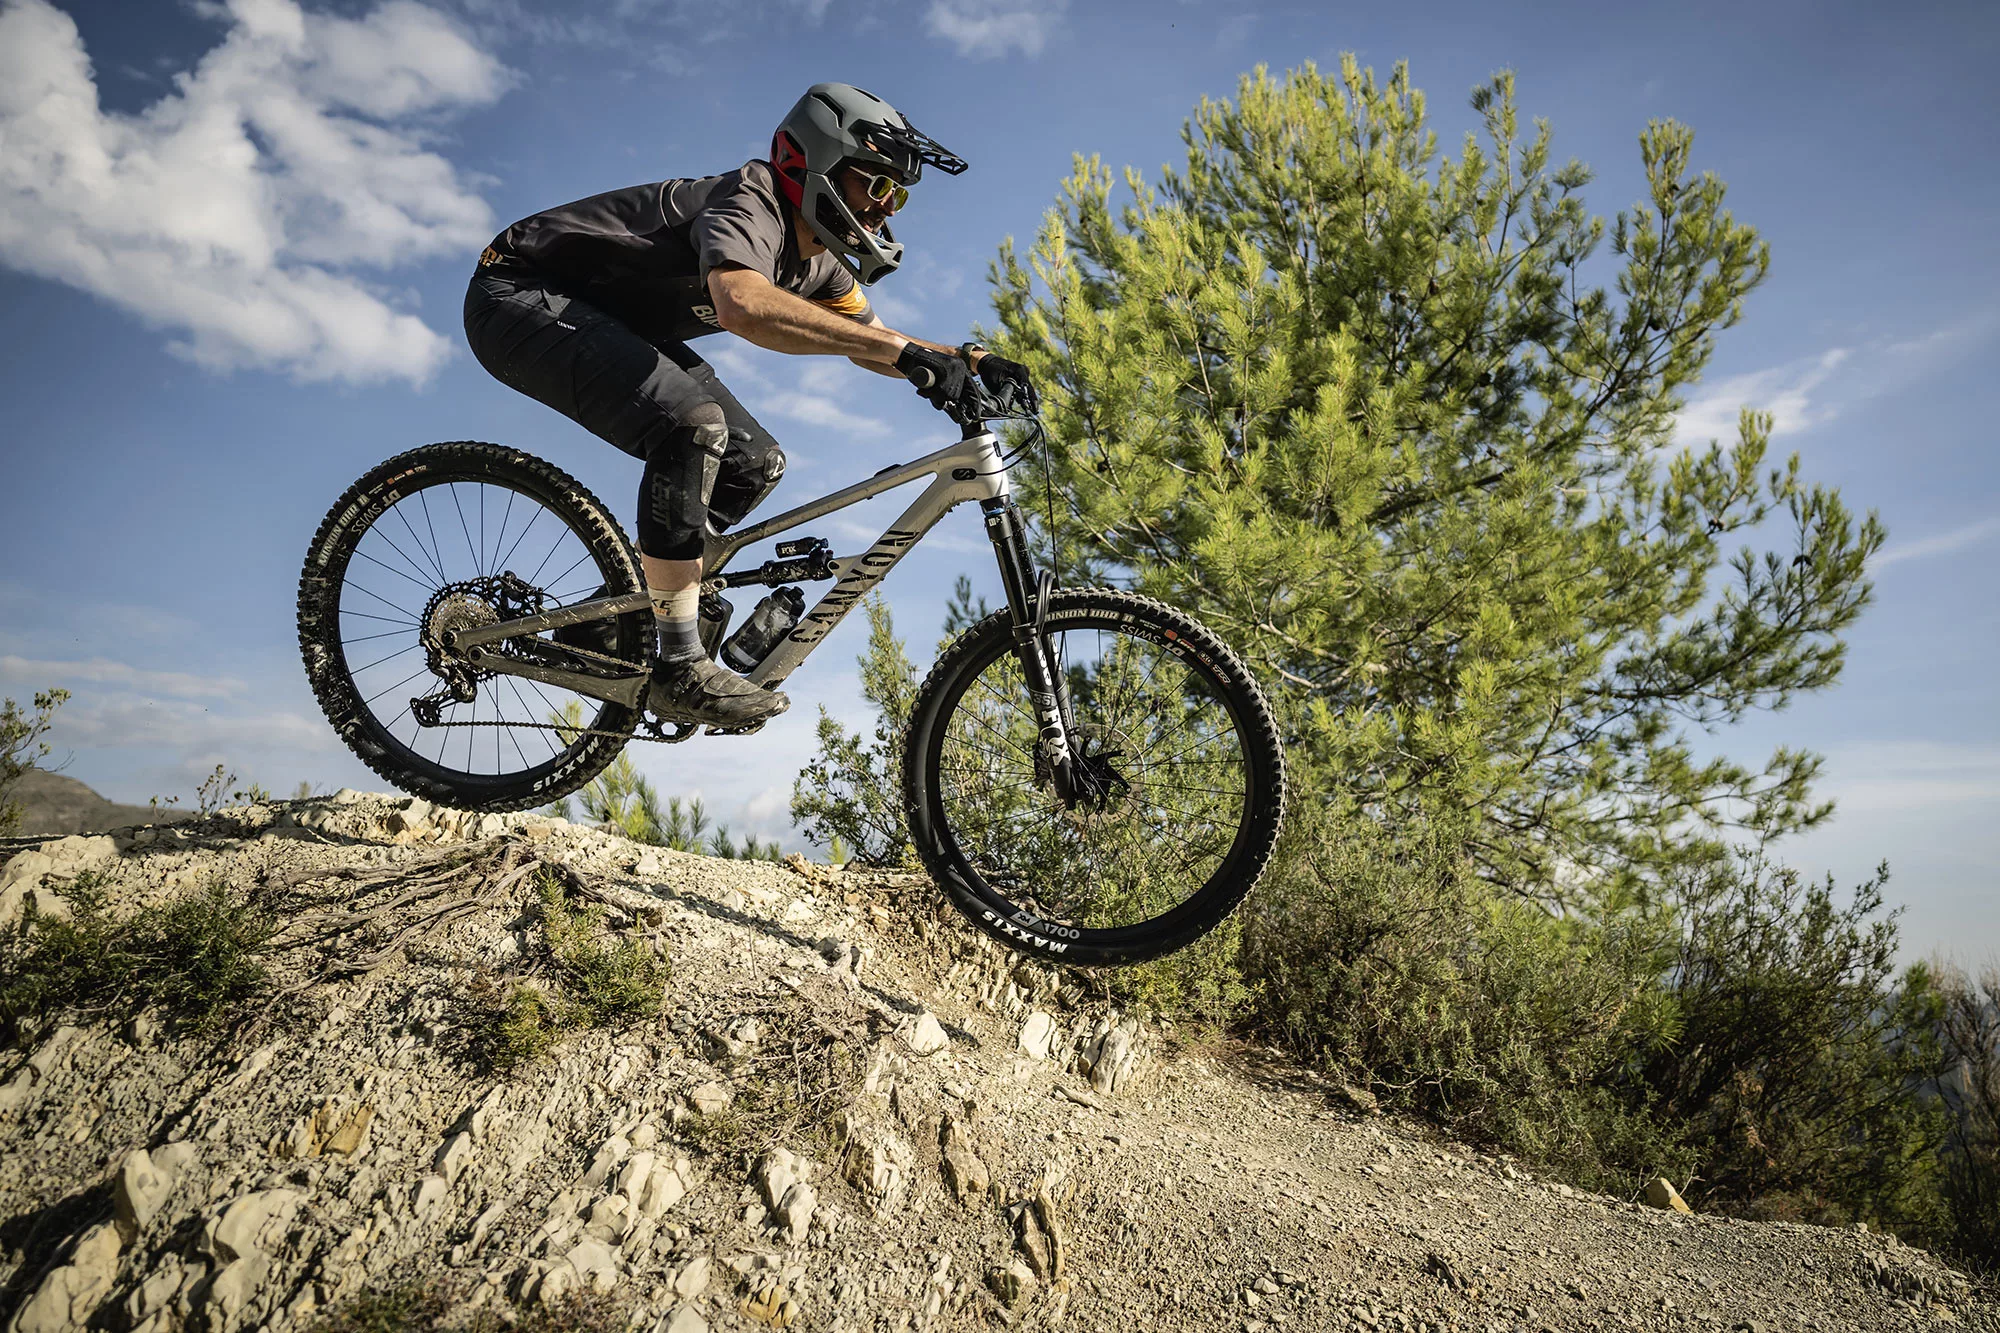 Canyon Spectral K.I.S. all-mountain bike review, Keep It Stable enduro trail riding, air